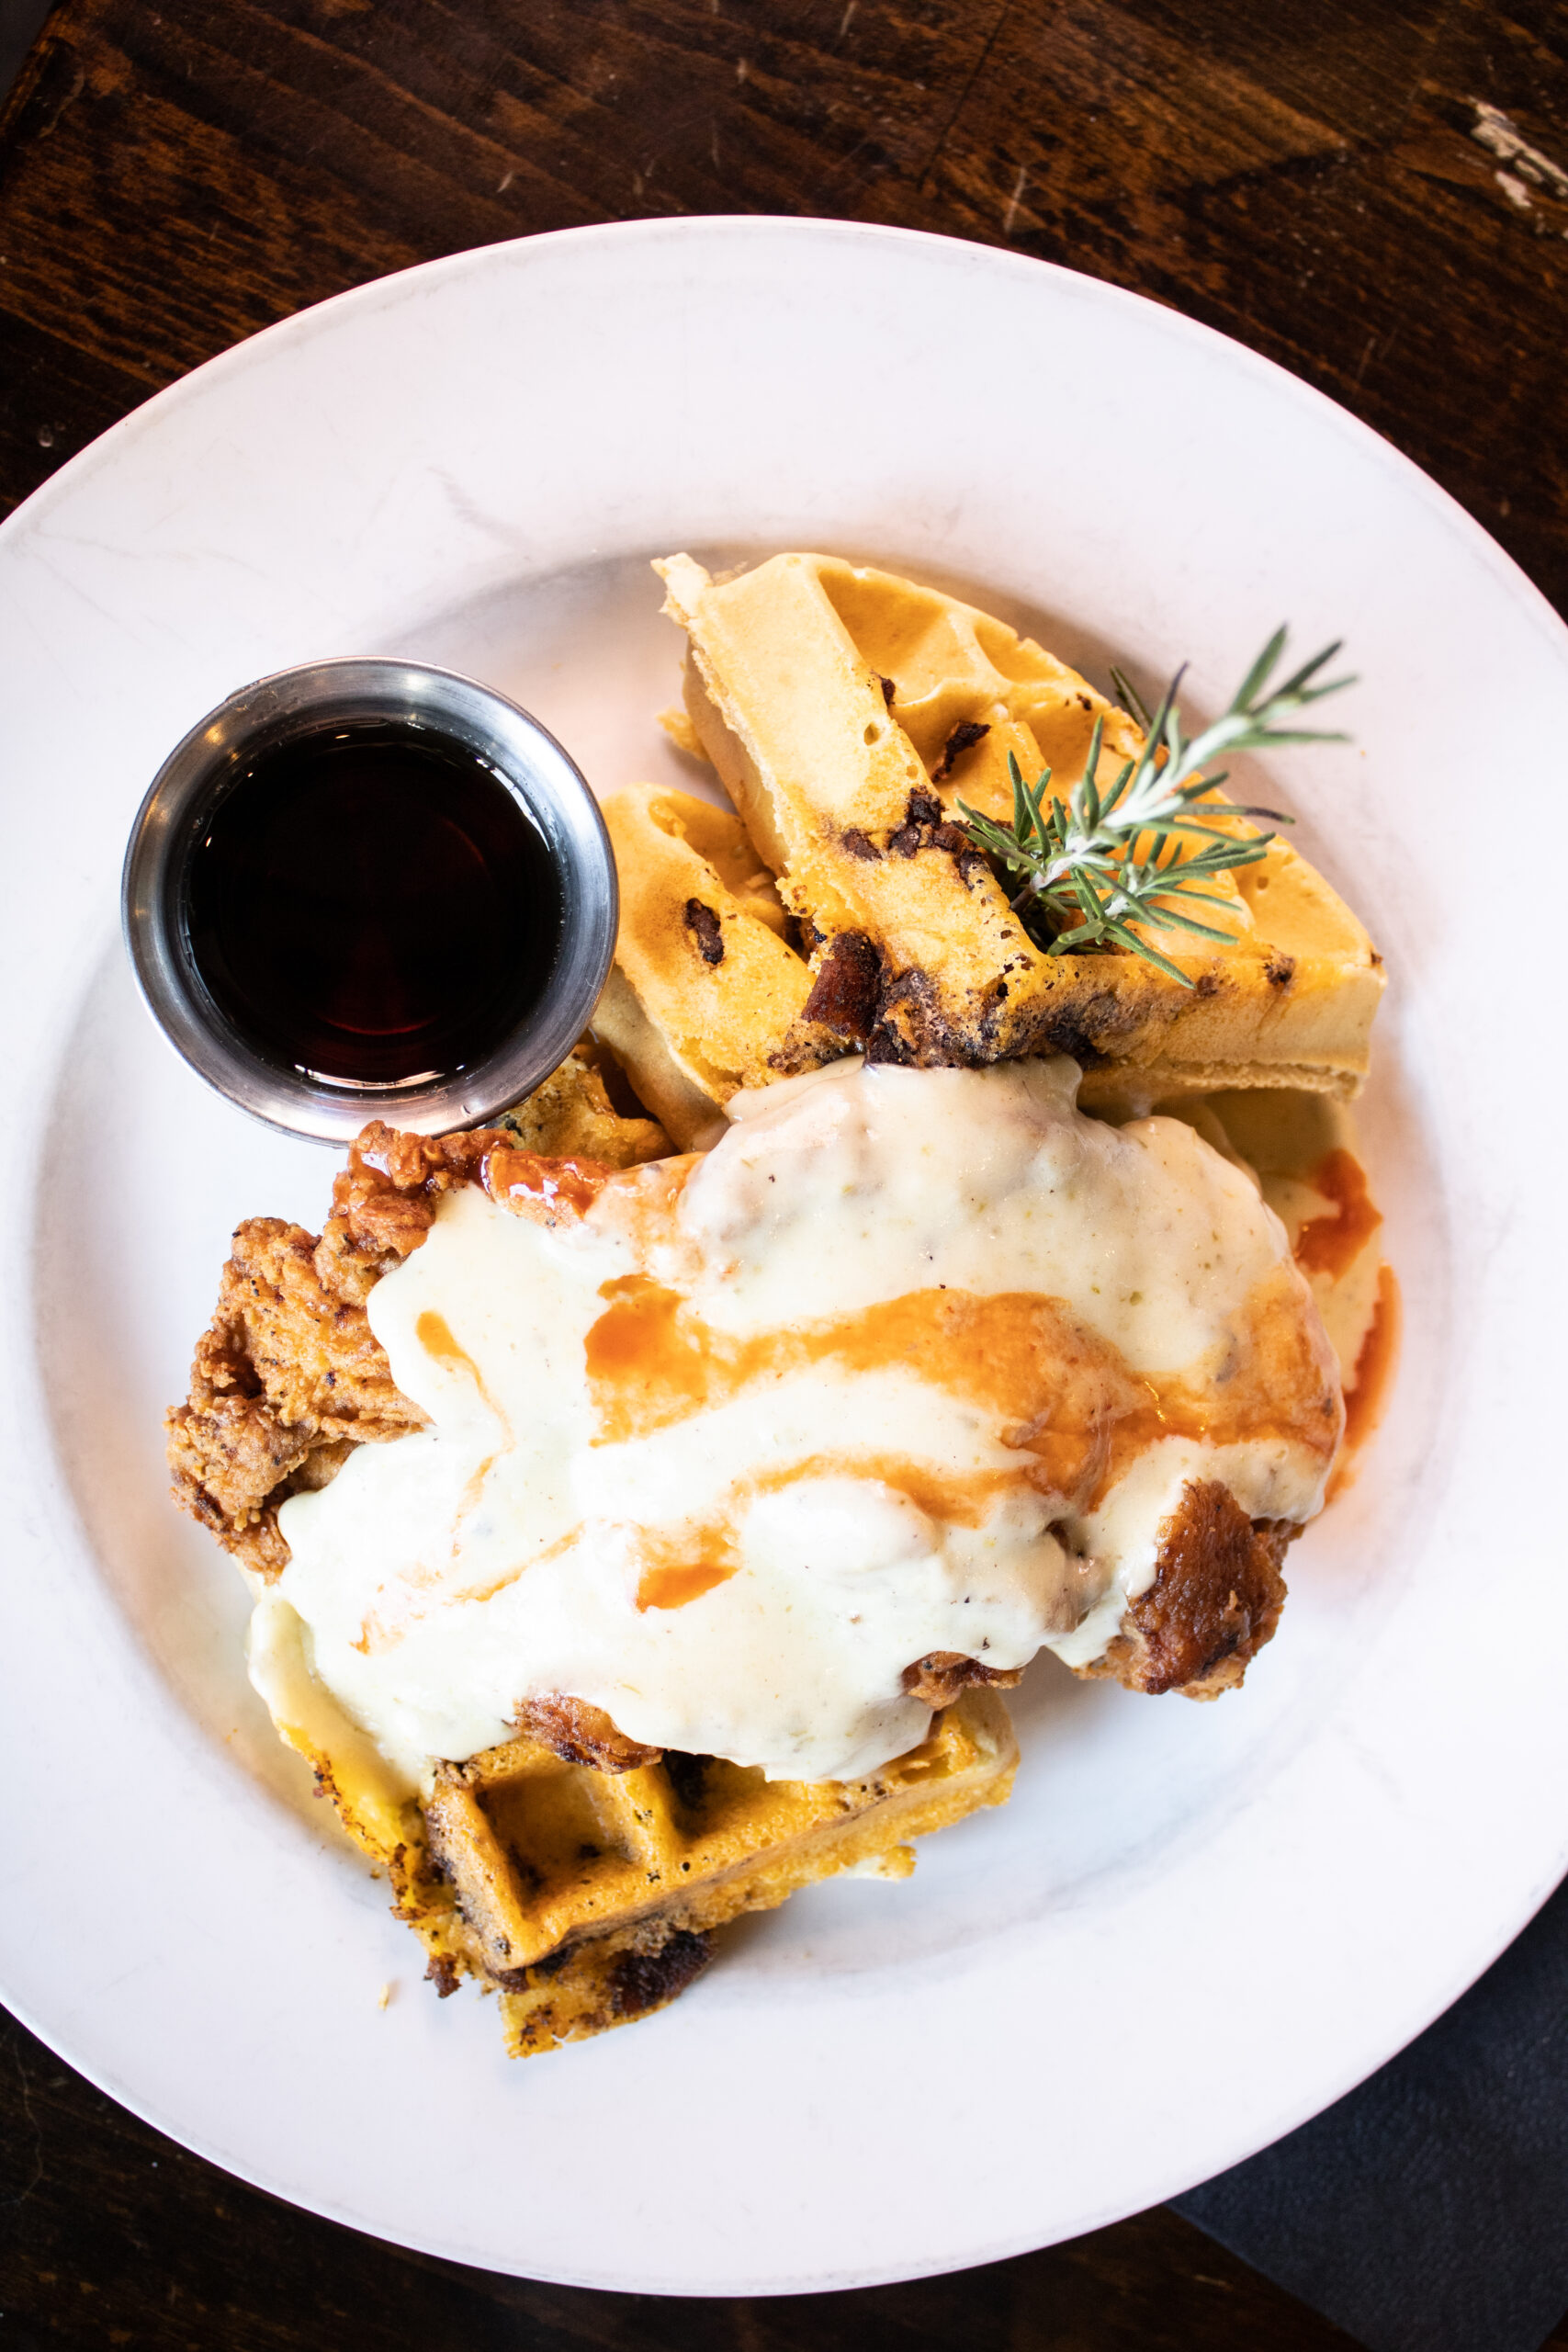 best restaurants in dallas: Breadwinners fried chicken and waffles which features jalapeño bacon cheddar waffles and crispy fried chicken sitting in a pool of cream gravy topped with hot sauce and maple syrup